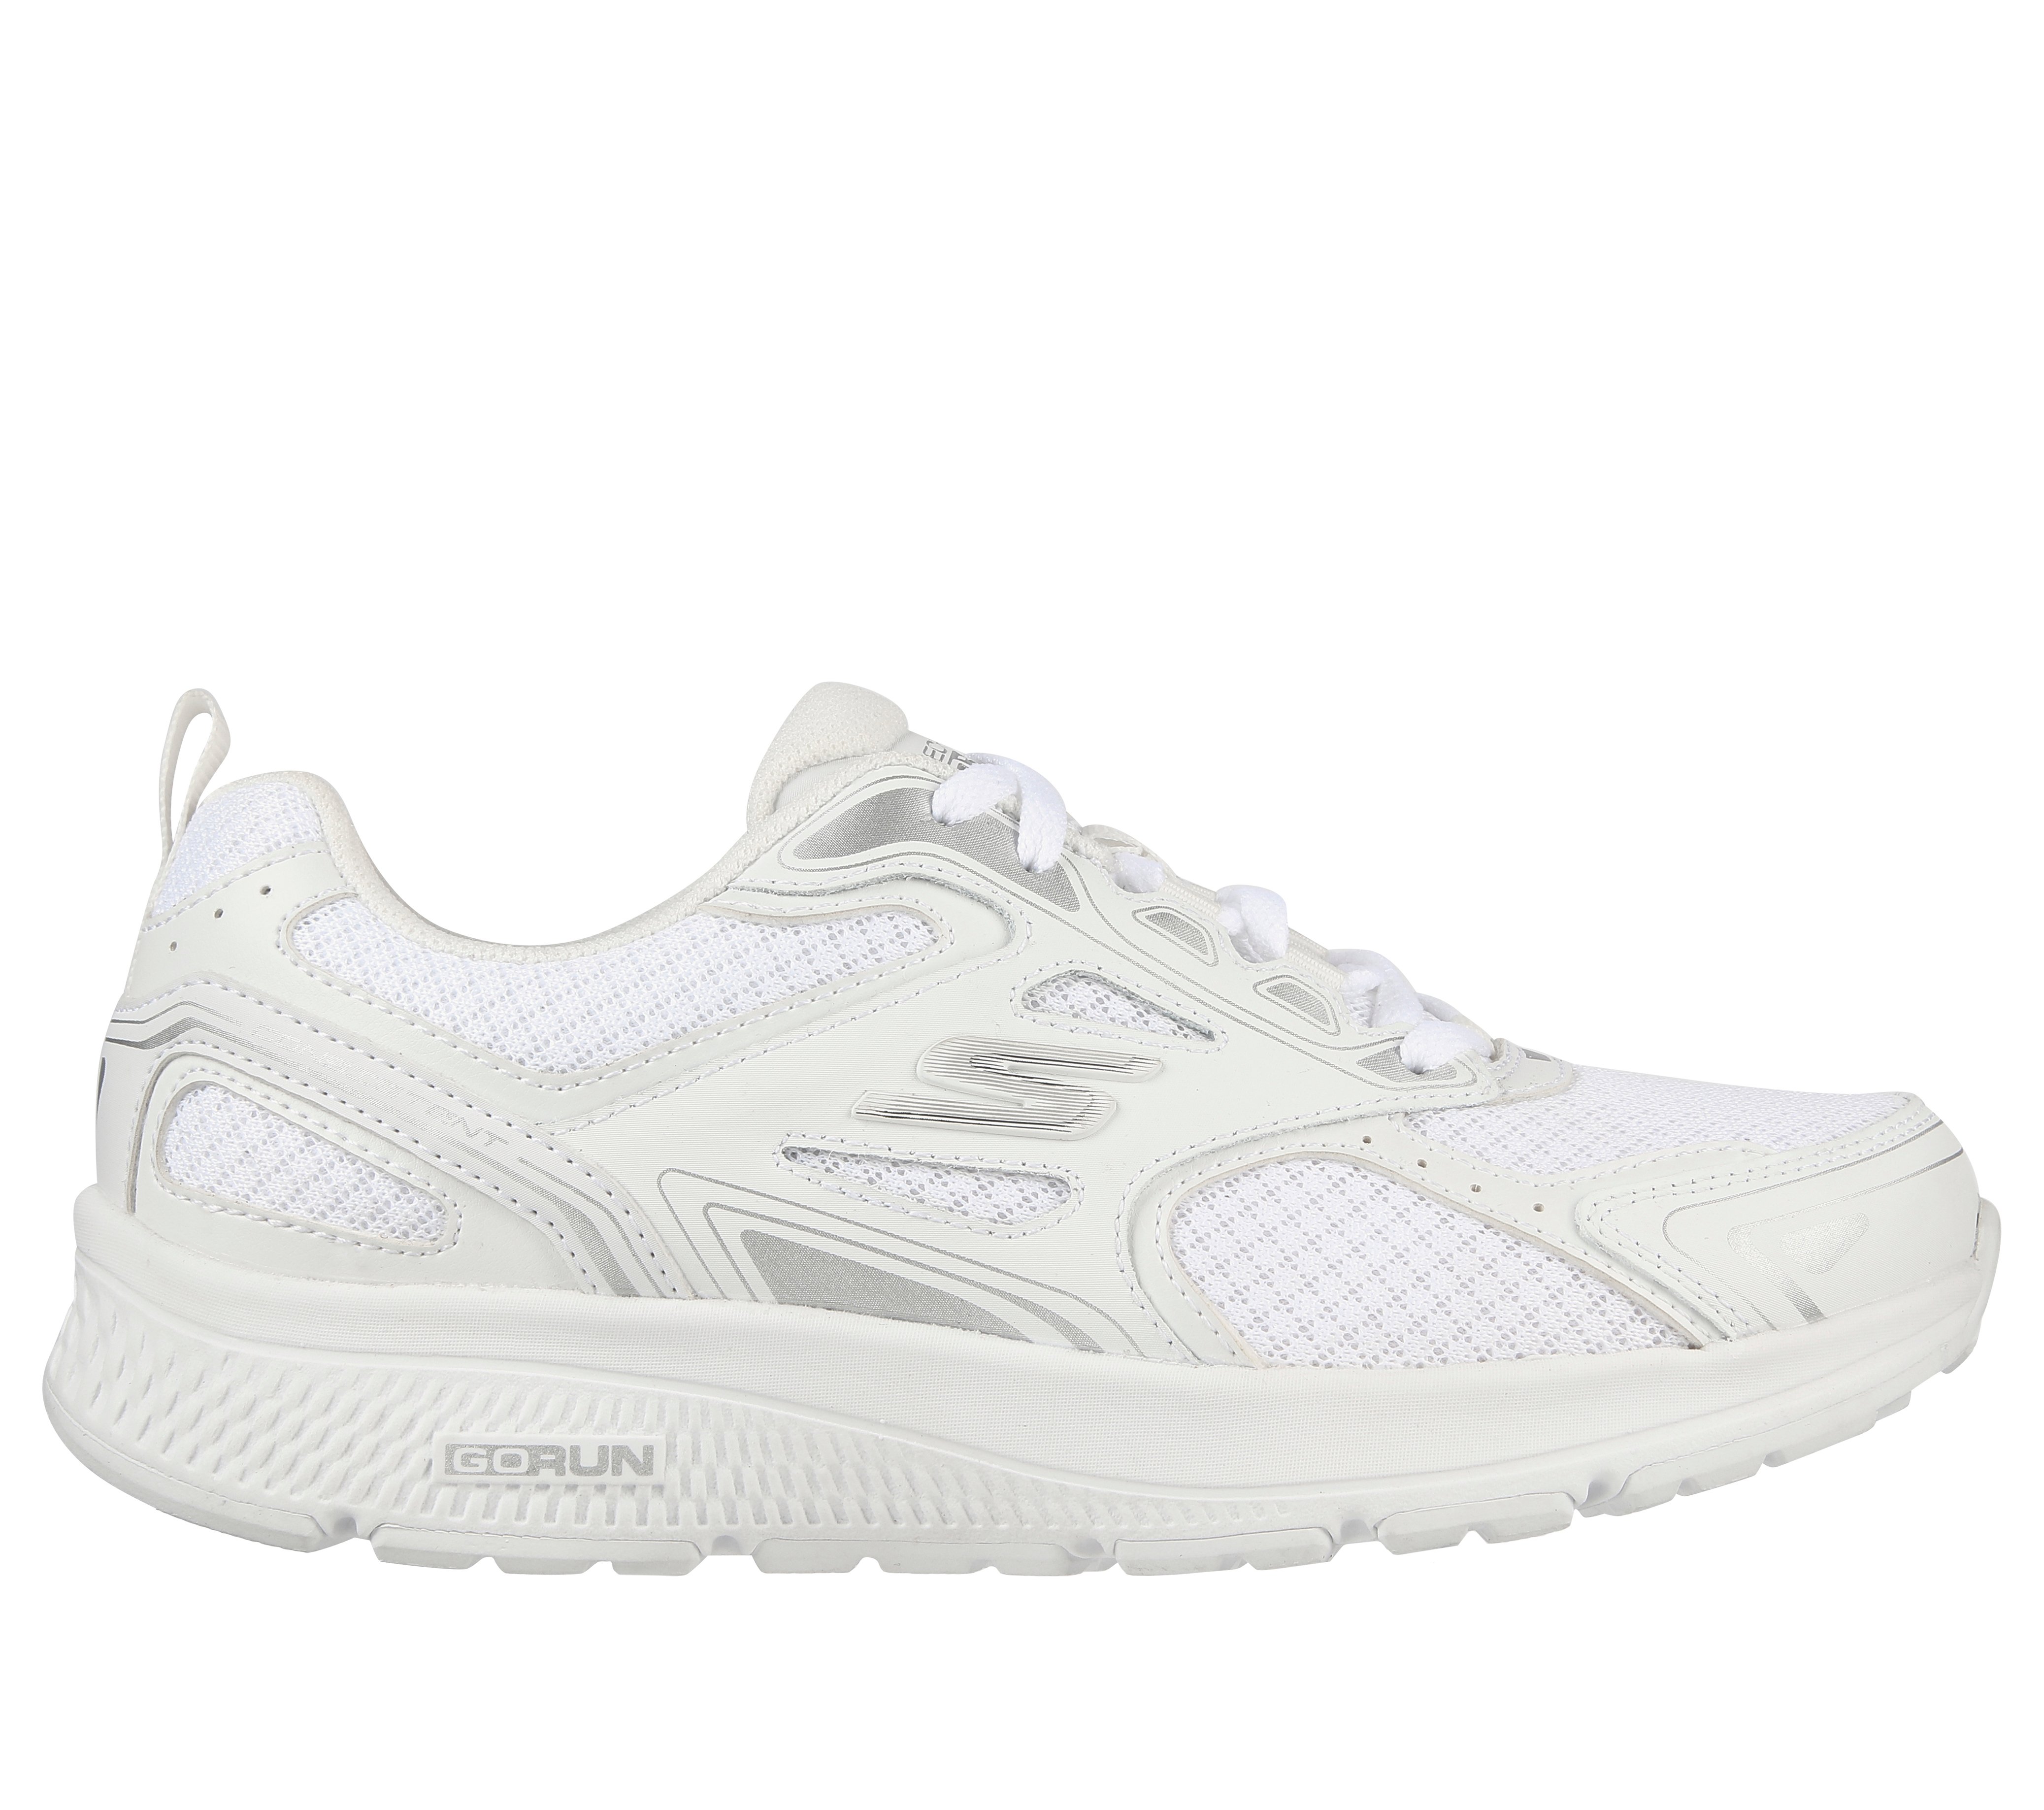 skechers for high arches